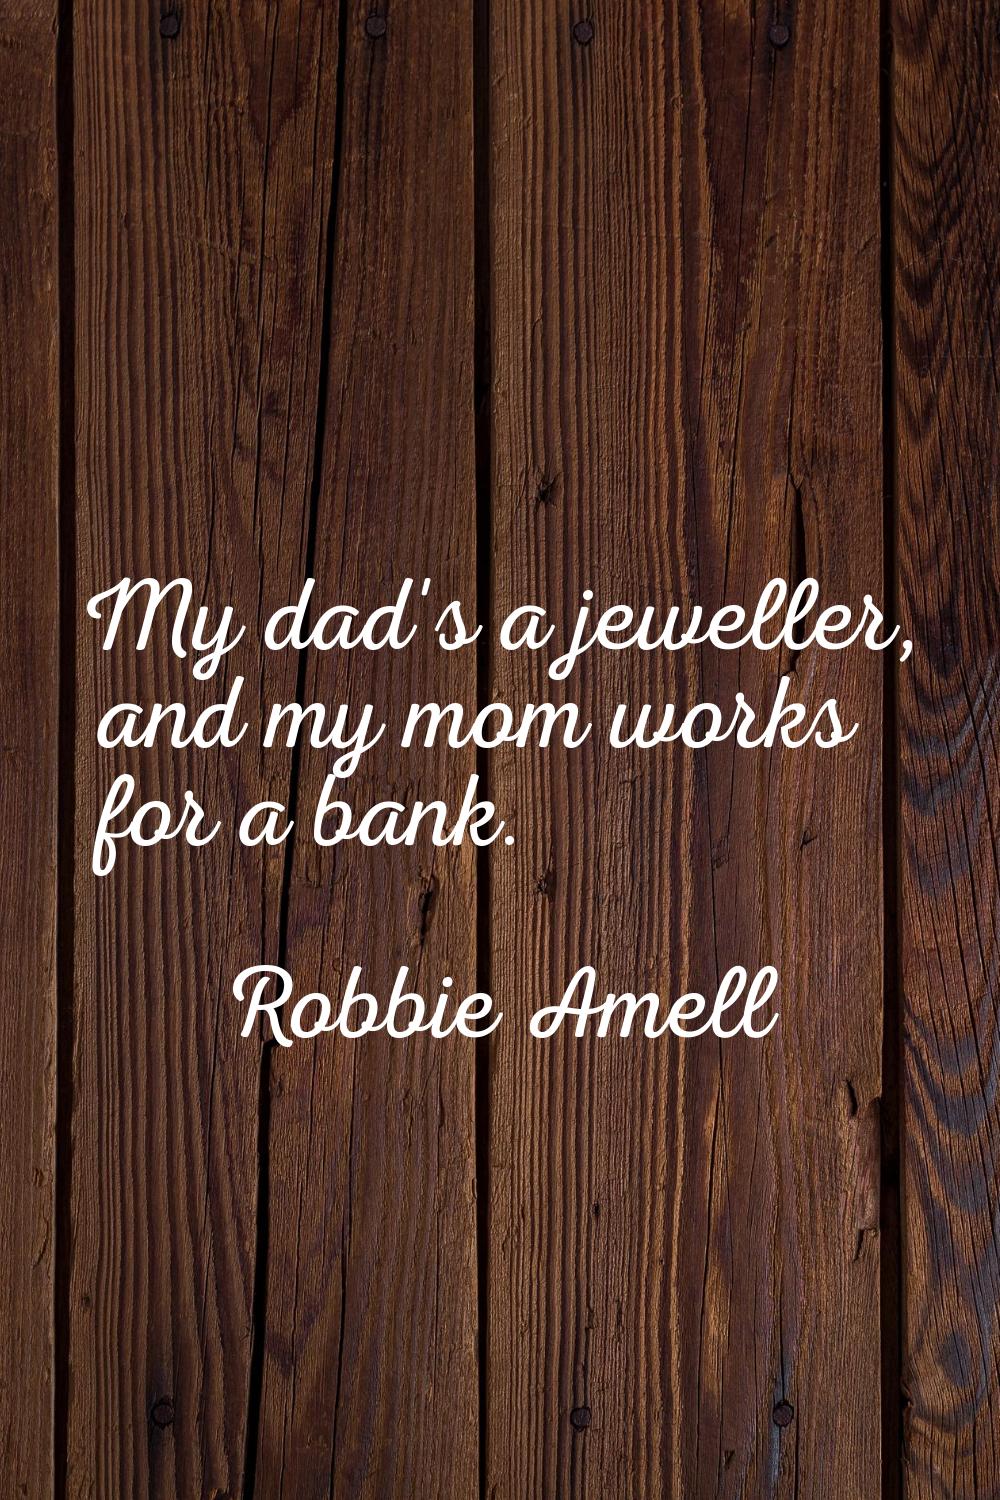 My dad's a jeweller, and my mom works for a bank.